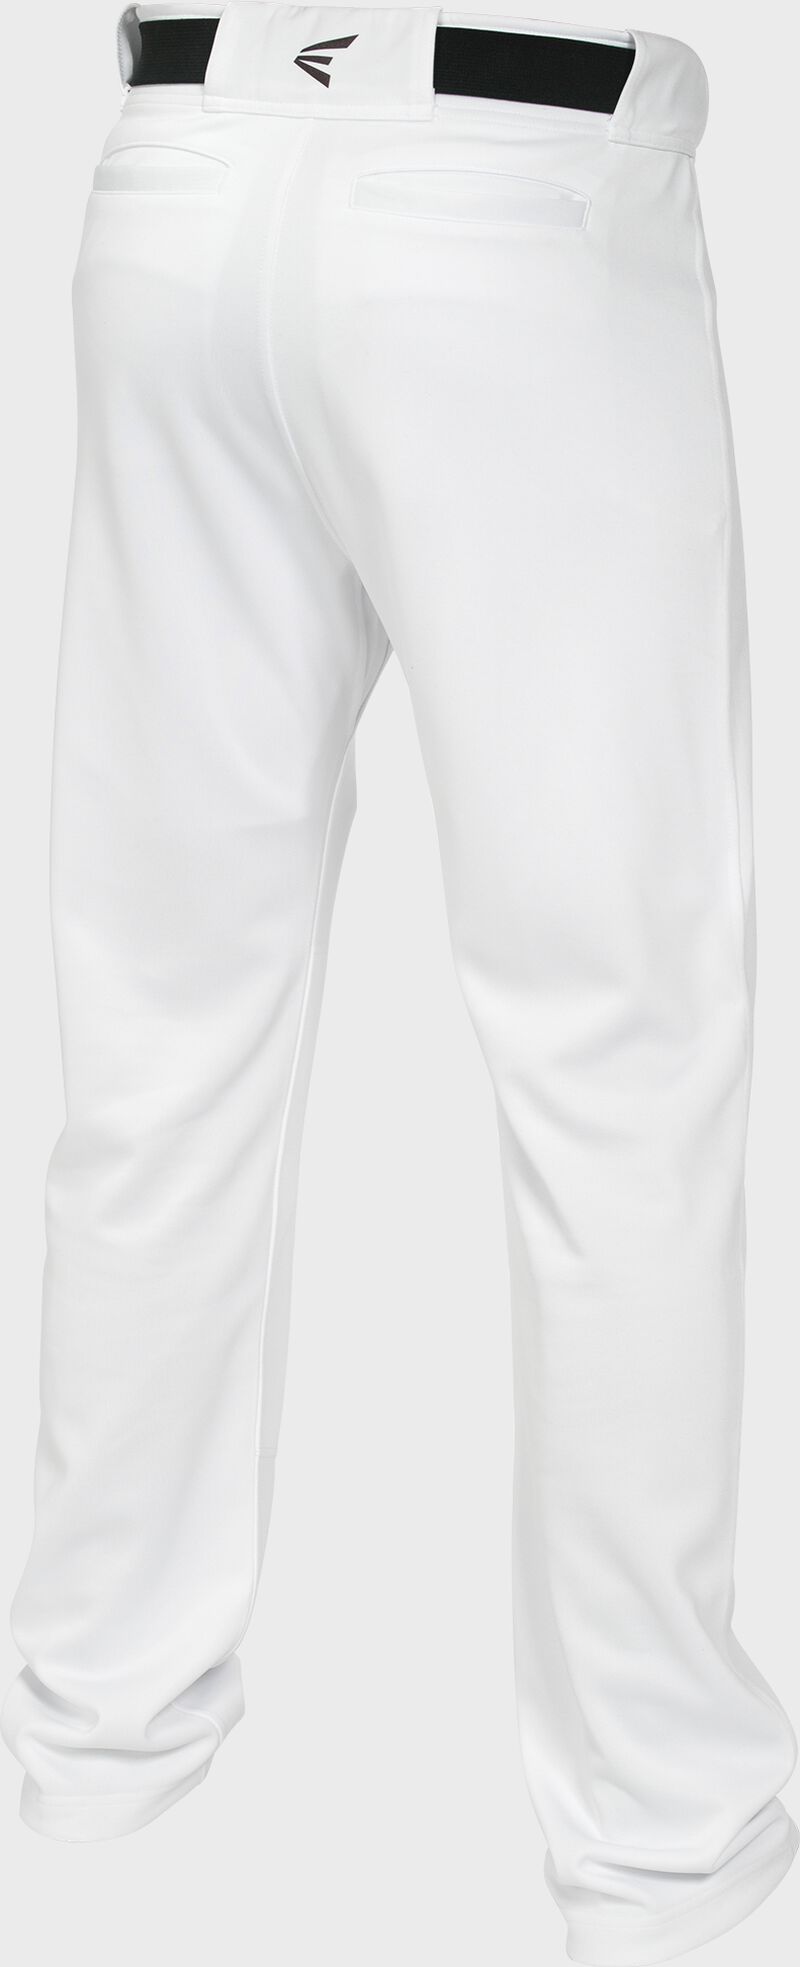 Mako 2 Pant Youth Solid WHITE  XL loading=